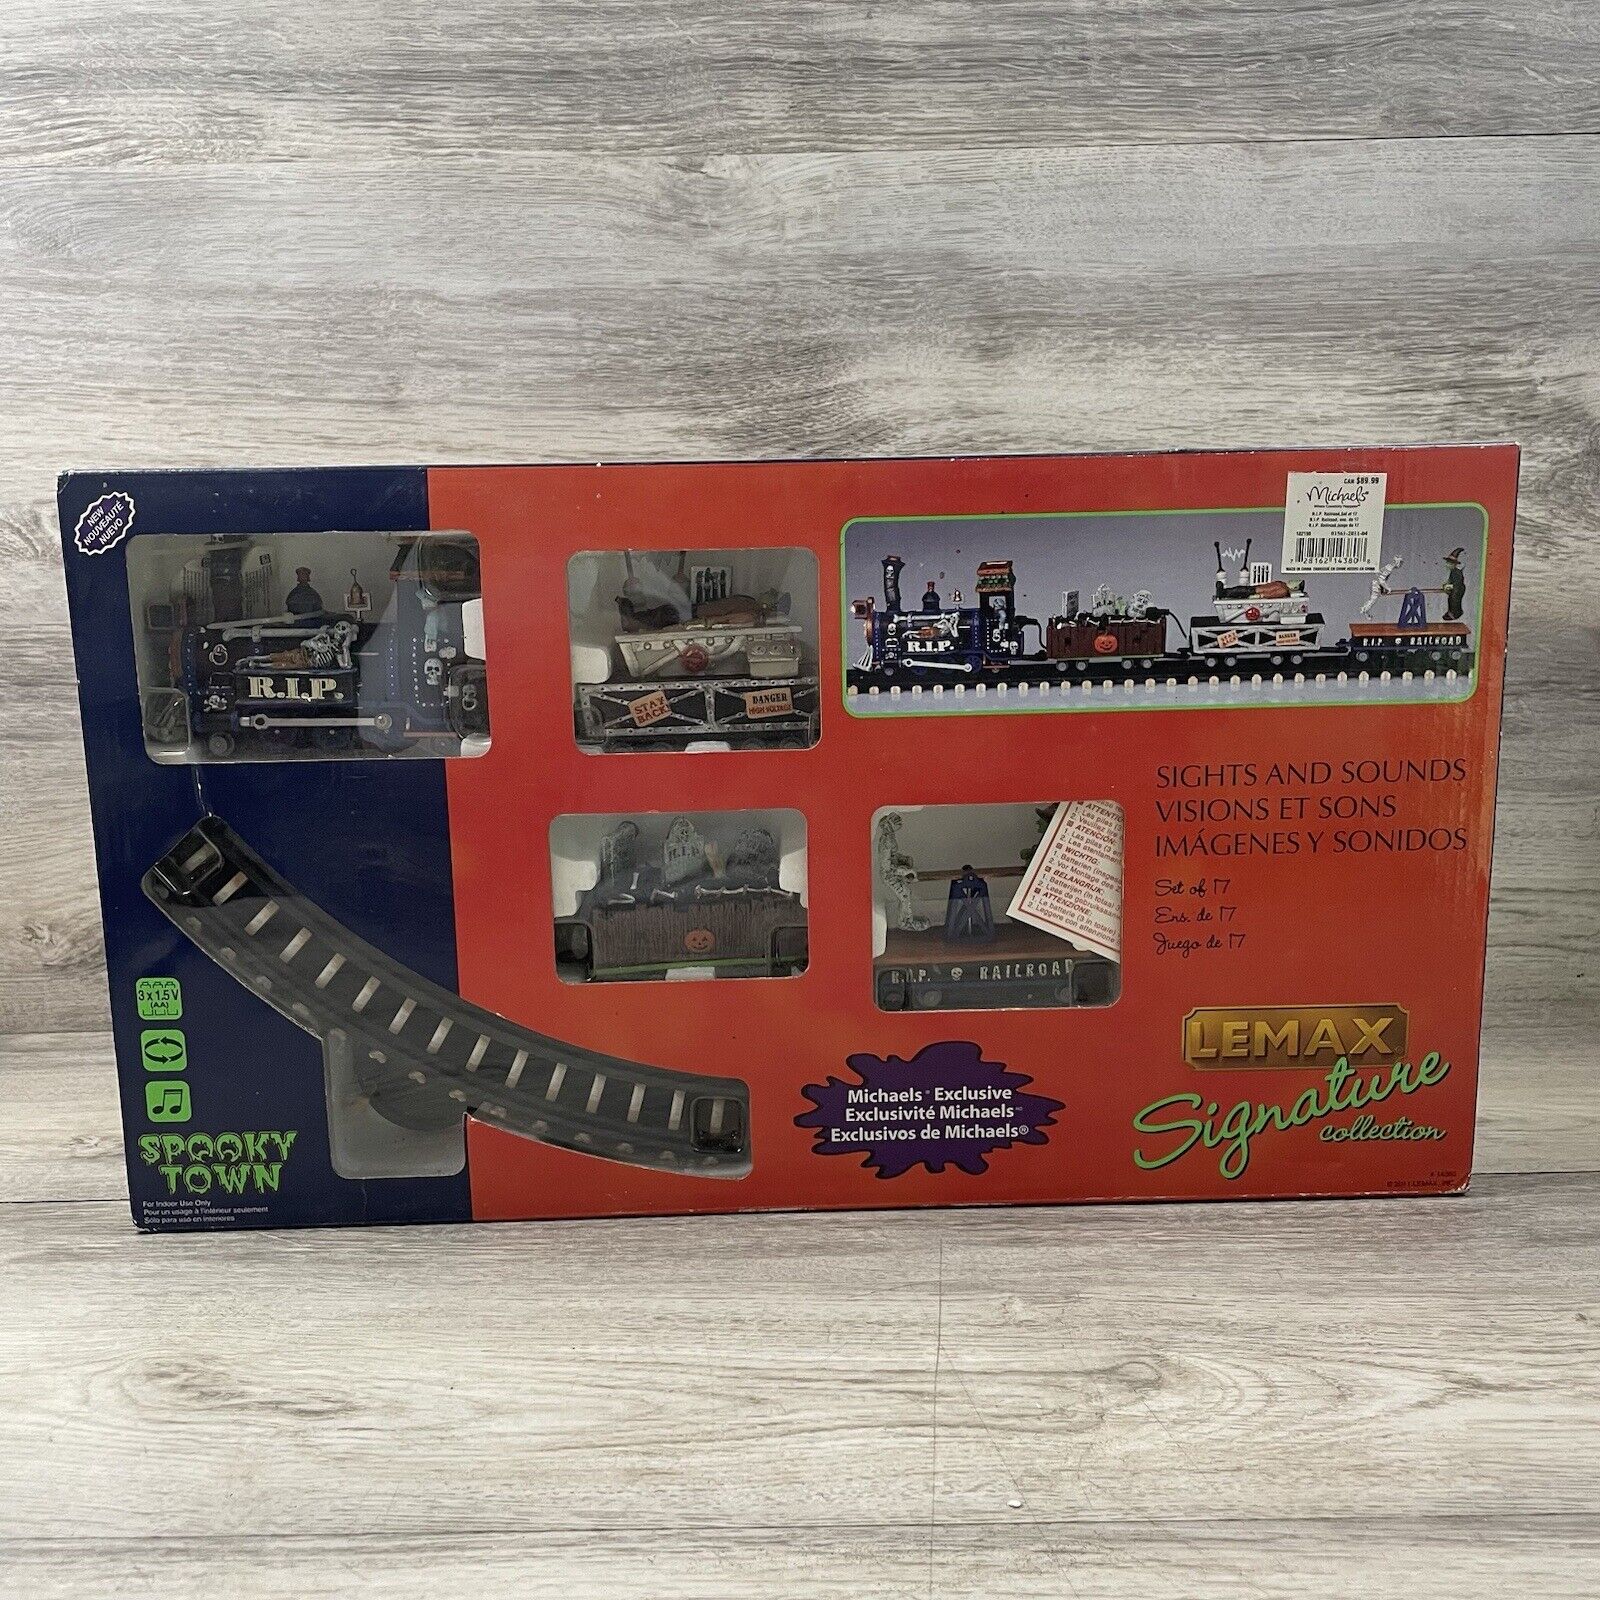 NEW LEMAX SPOOKY TOWN R.I.P. HALLOWEEN TRAIN SET MICHAELS EXCLUSIVE